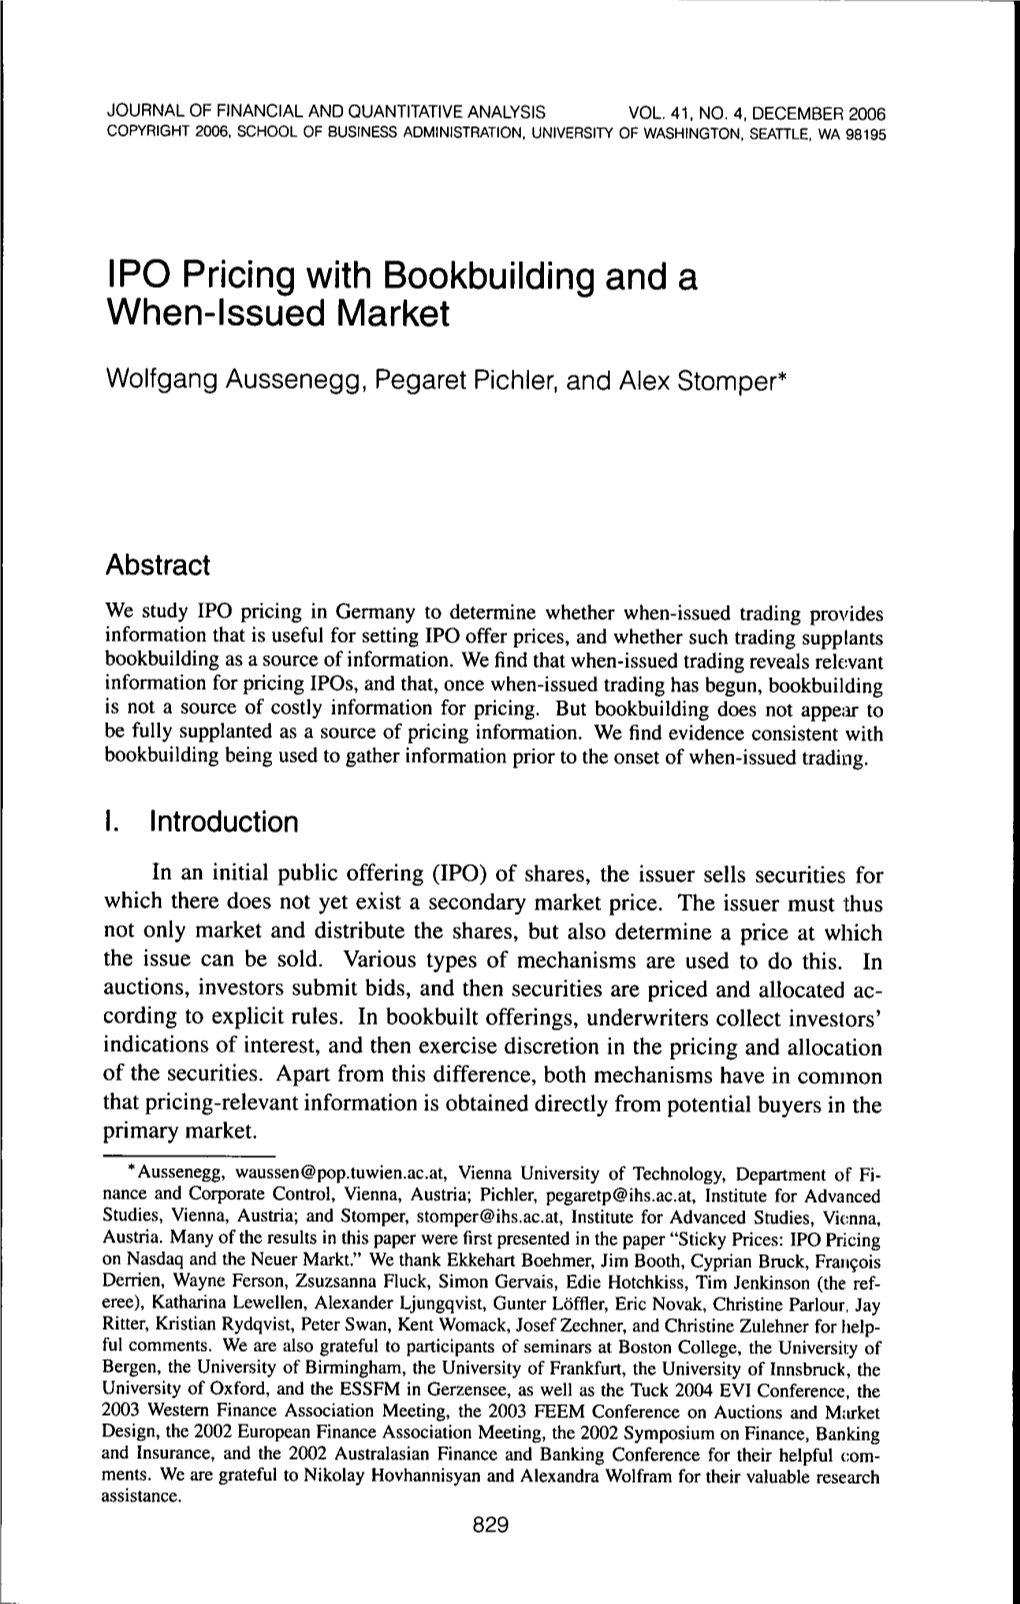 IPO Pricing with Bookbuilding and a When-Issued Market